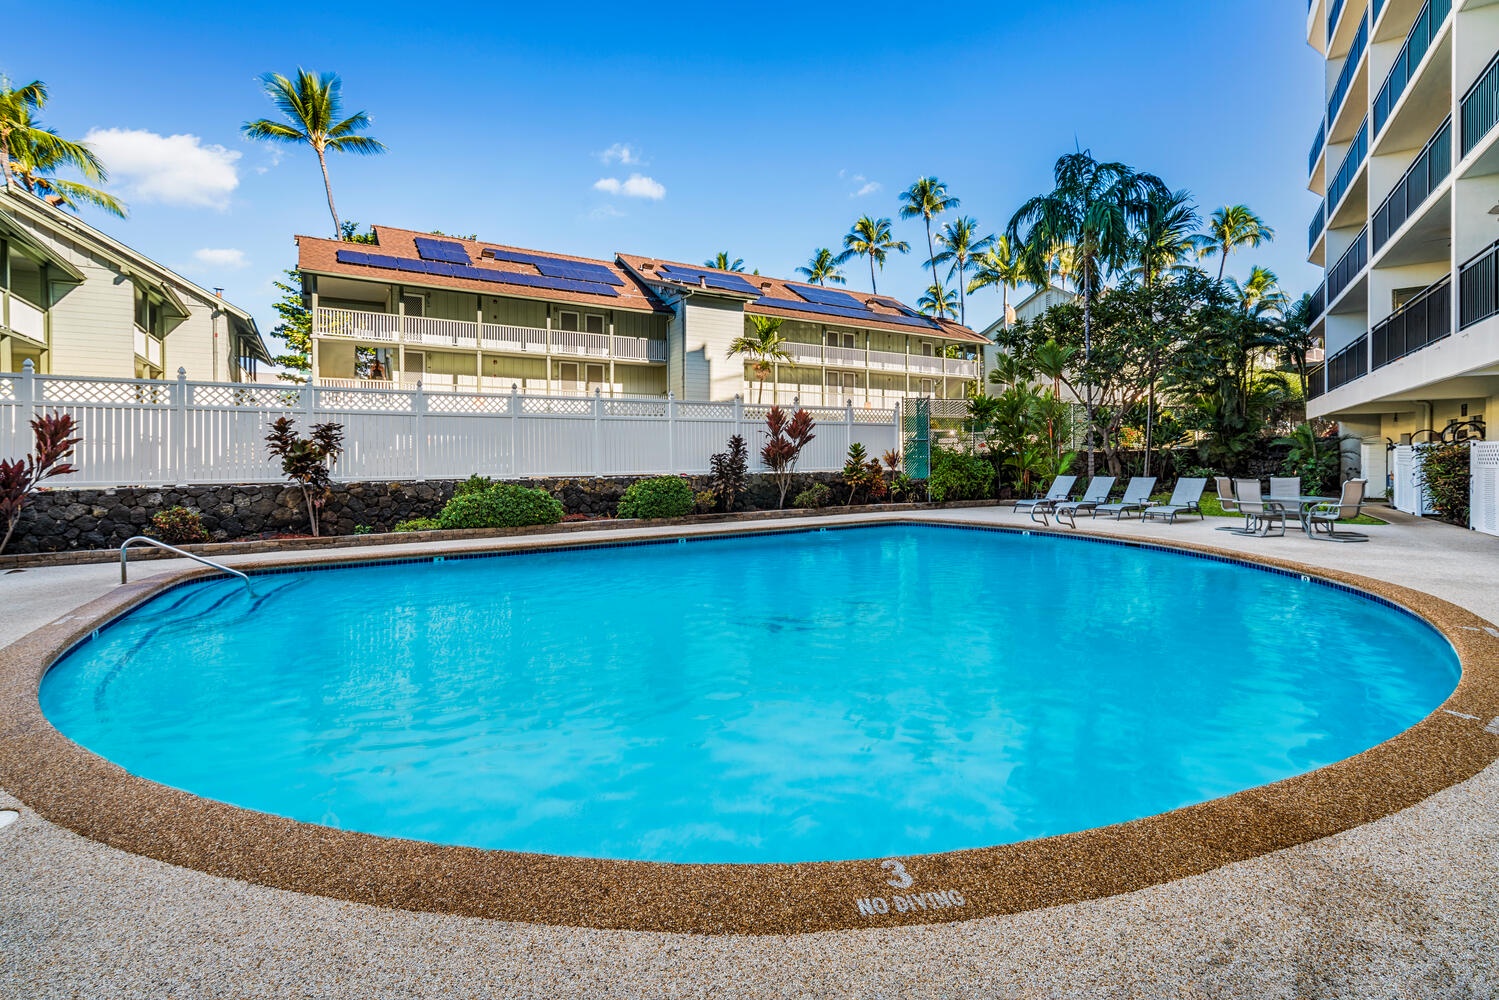 Kailua Kona Vacation Rentals, Kona Alii 403 - Quench the island heat and plunge in the pool.